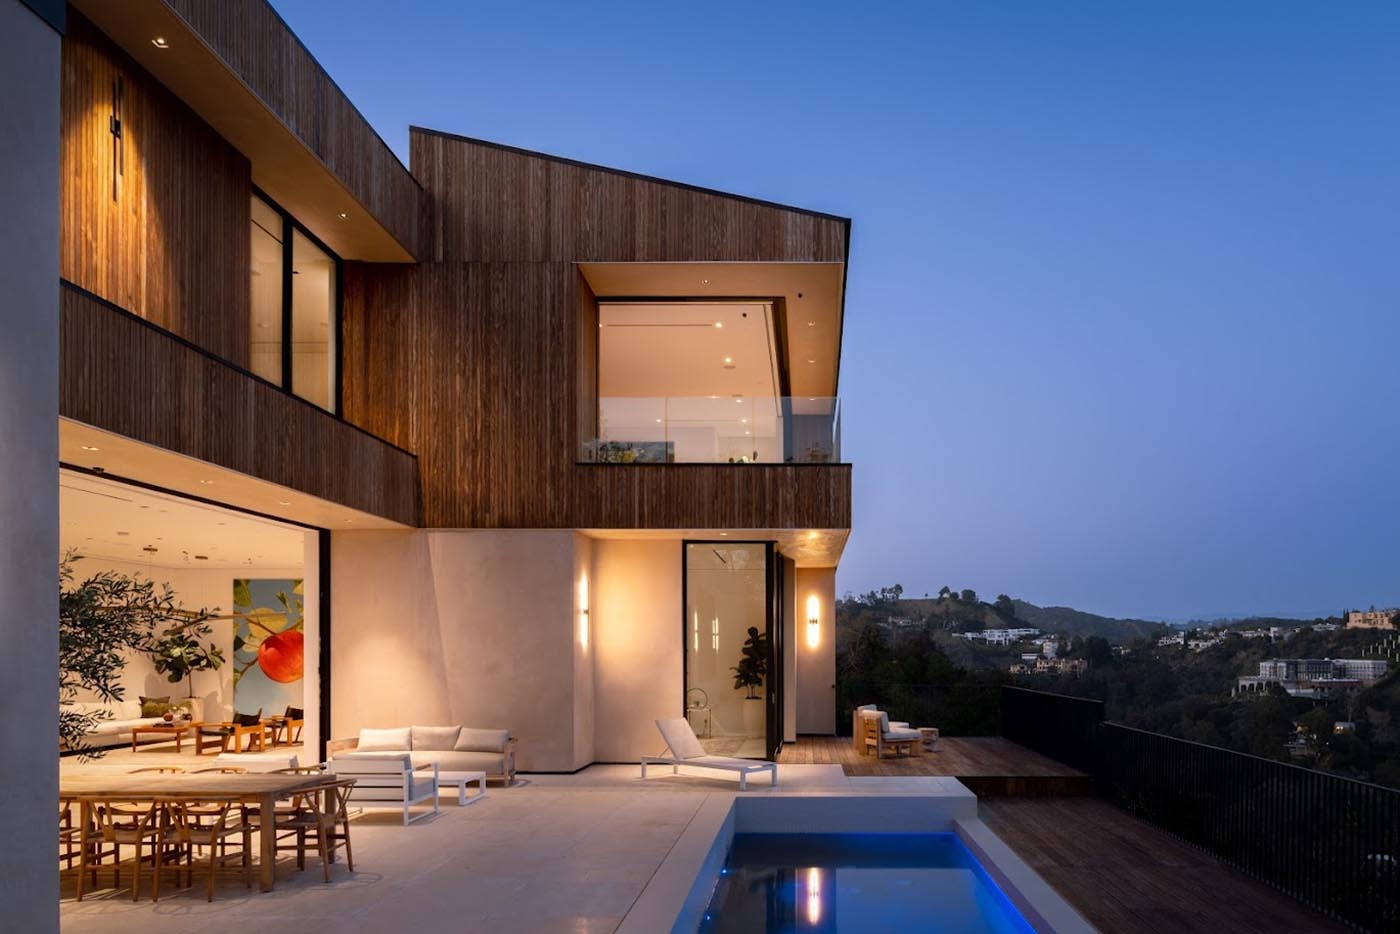 Bel Air Hillside Home Makes the Most of Warm Minimalism 